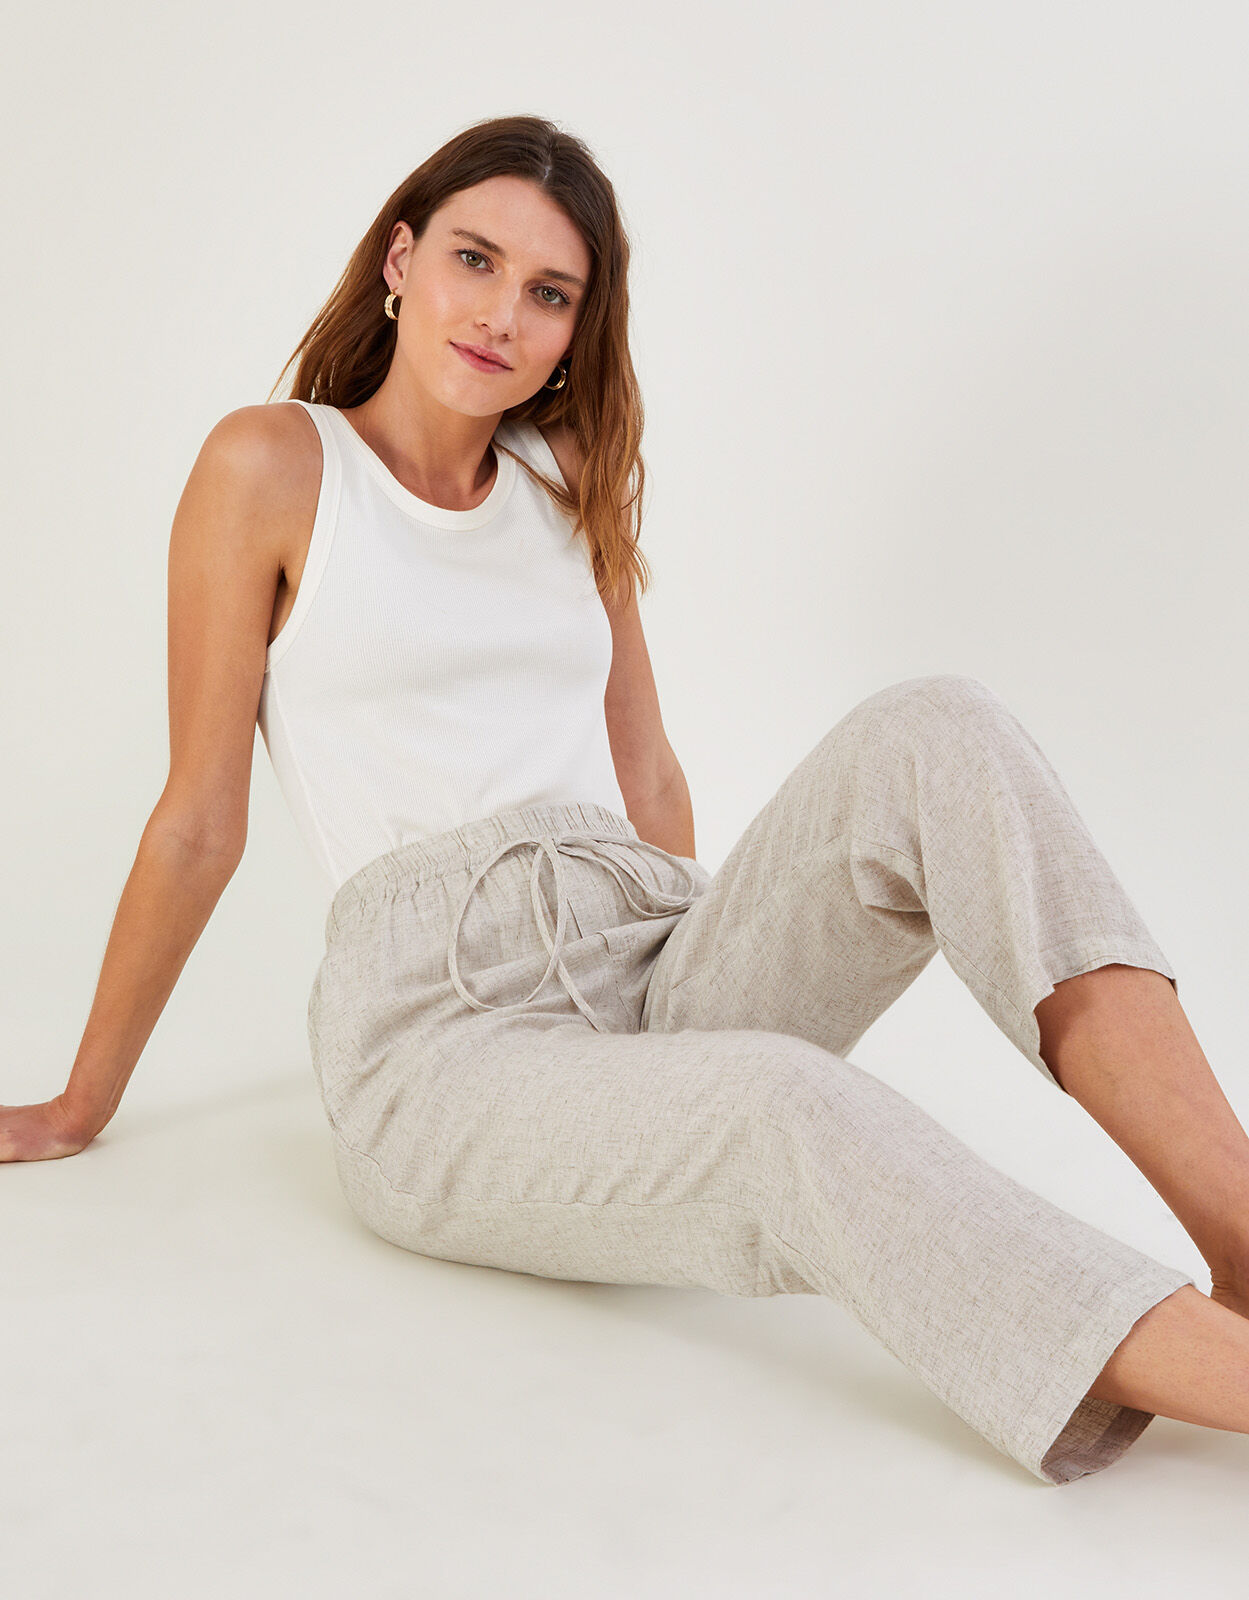 Buy Multicoloured Trousers  Pants for Women by Marks  Spencer Online   Ajiocom